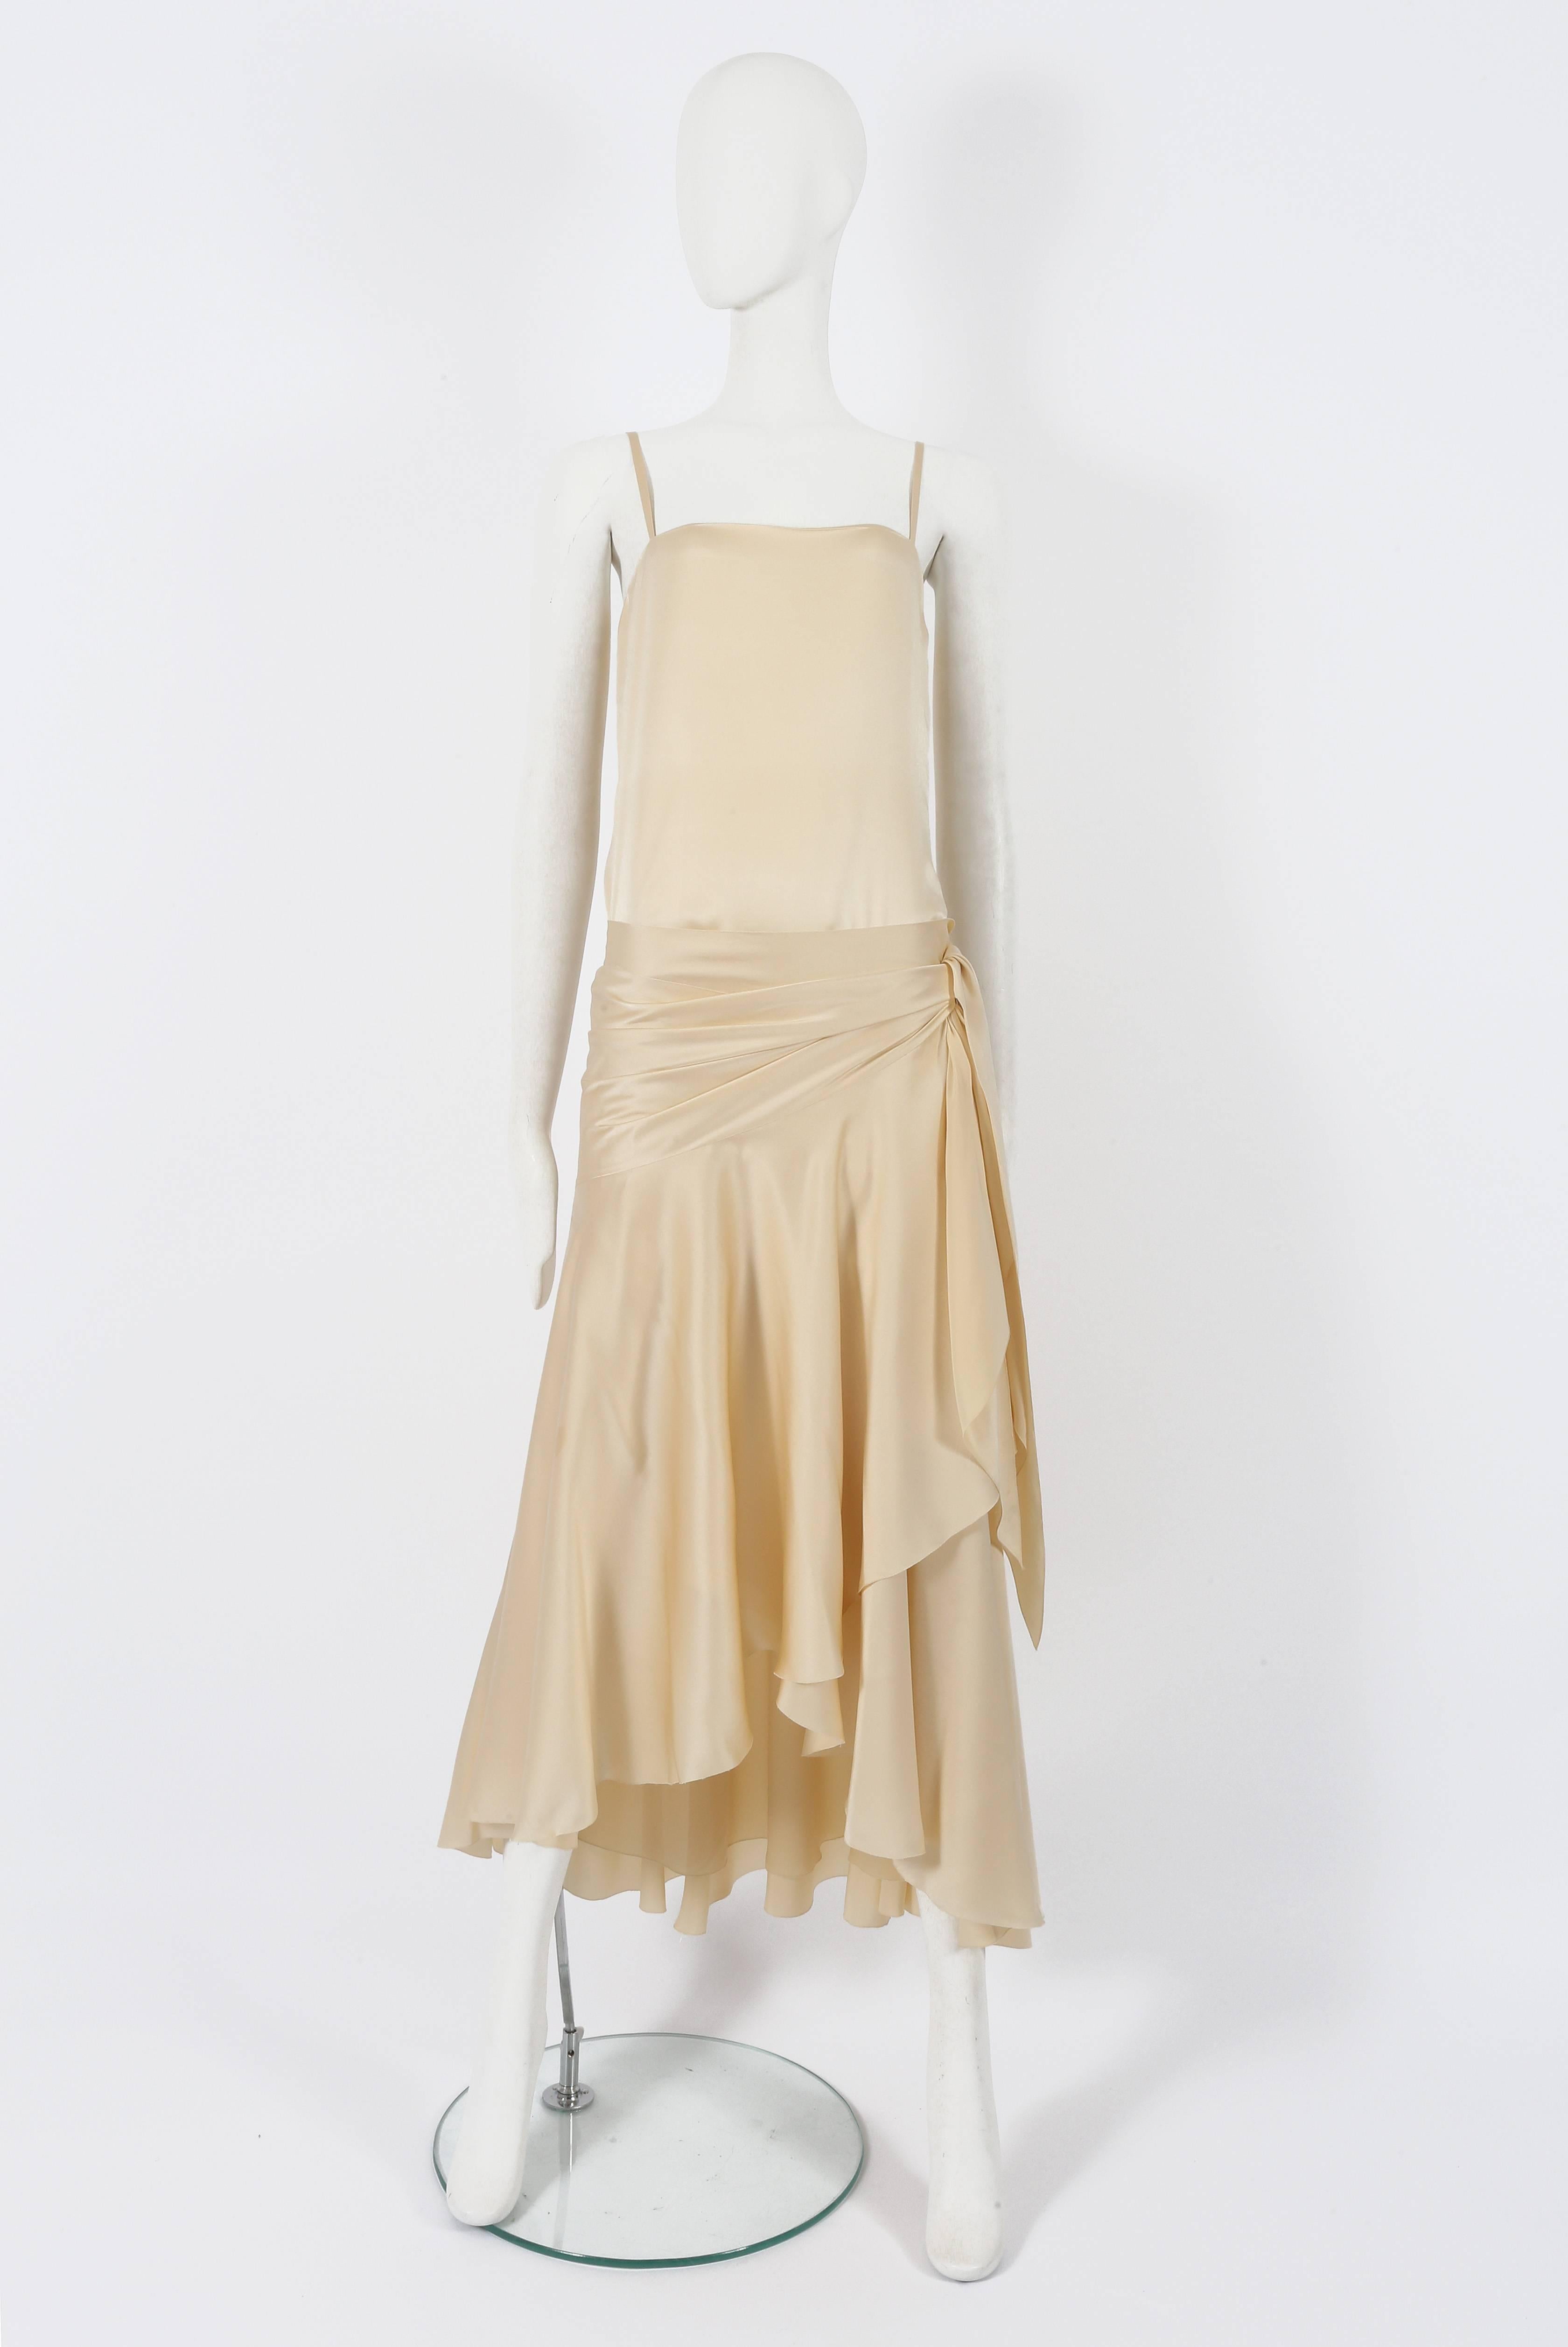 Christian Dior Haute Couture by Marc Bohan ivory silk two-piece evening ensemble, Autumn Winter 1978. The ensemble is made up of a silk slip dress with spaghetti straps and metal zip closure and a wrap skirt which can be worn on the hips or styled